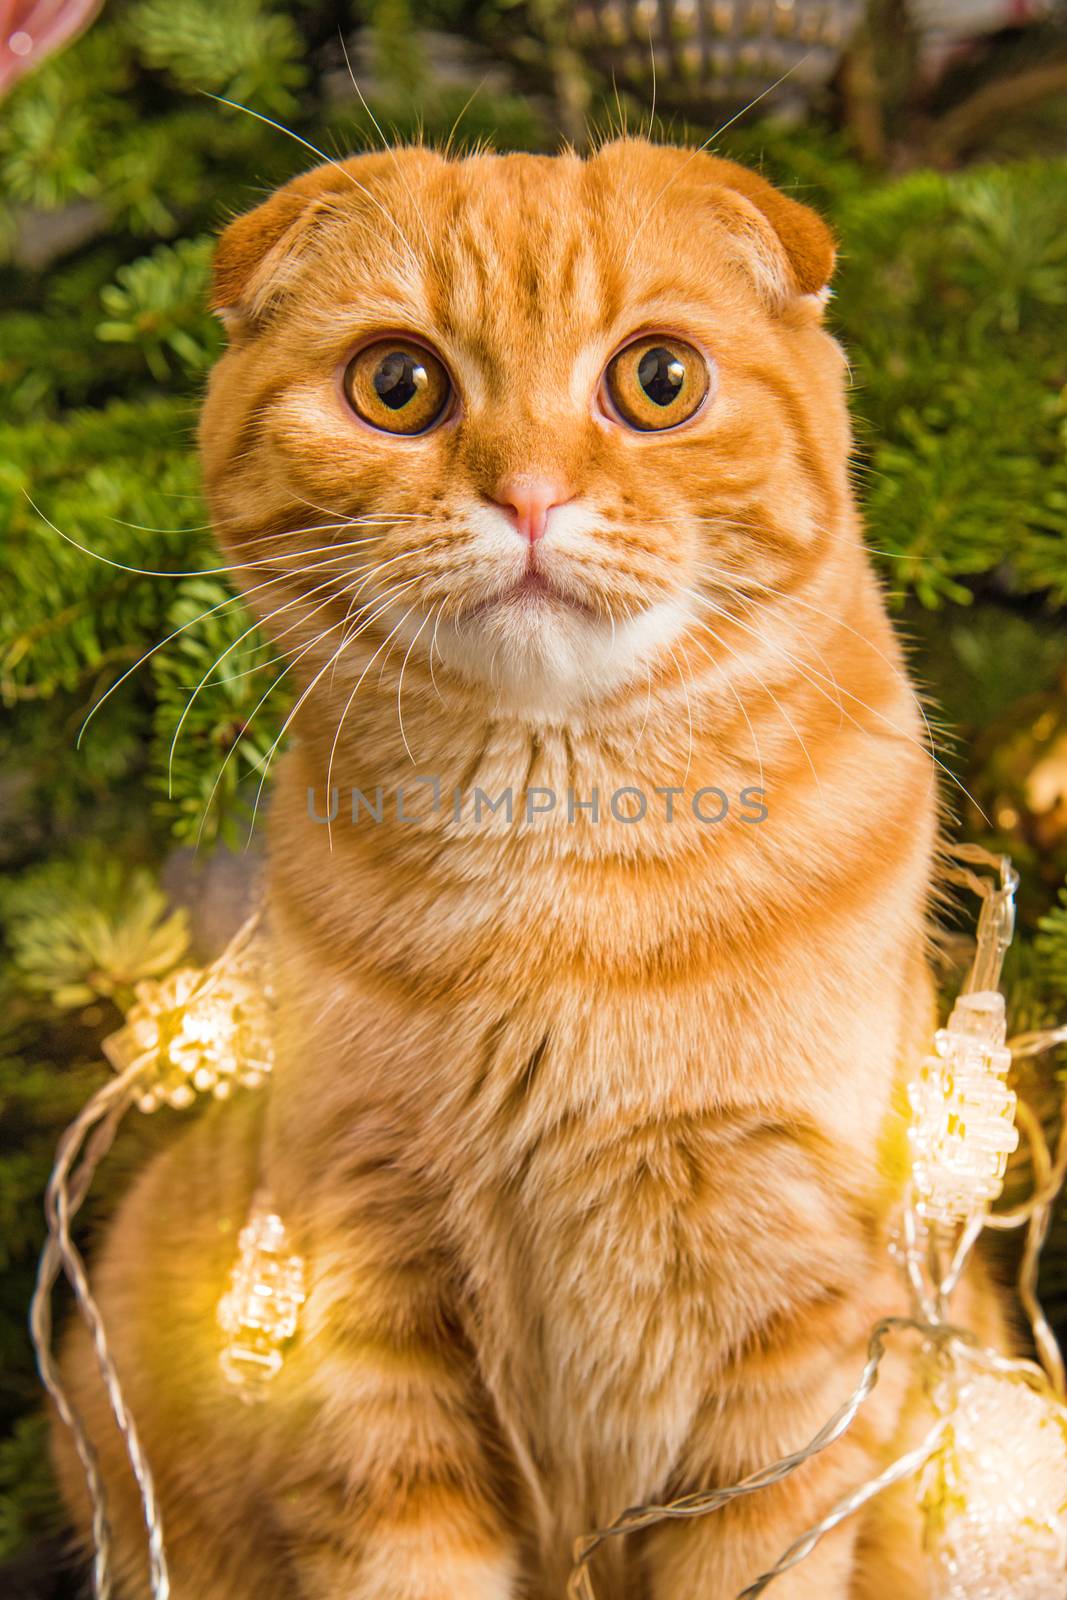 Red Scottish Fold red cat close up near Christmas tree in light